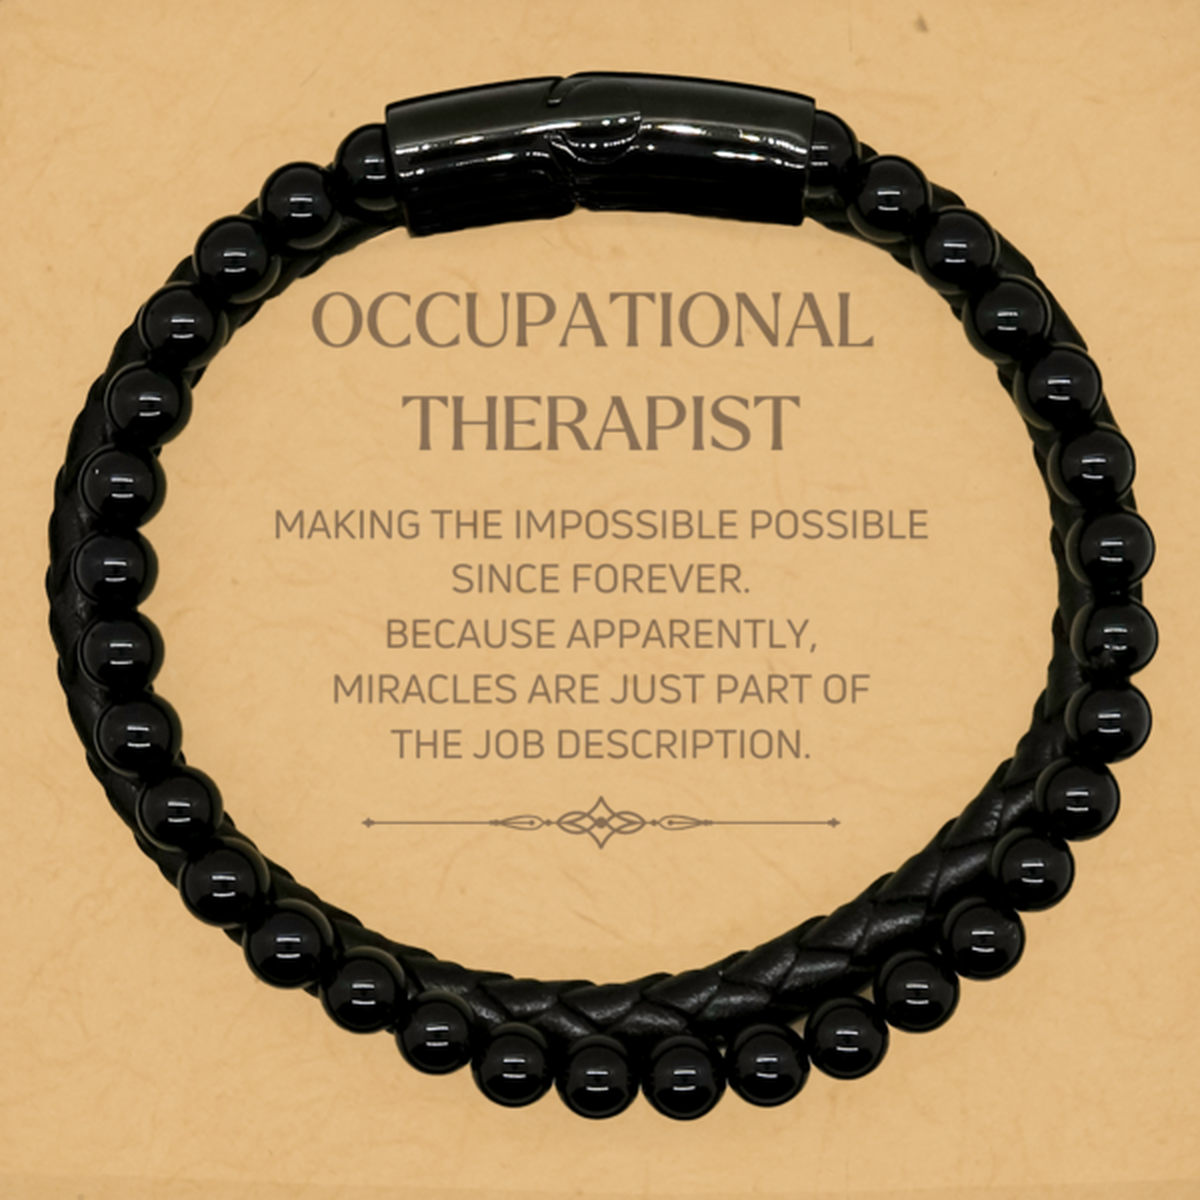 Funny Occupational Therapist Gifts, Miracles are just part of the job description, Inspirational Birthday Stone Leather Bracelets For Occupational Therapist, Men, Women, Coworkers, Friends, Boss